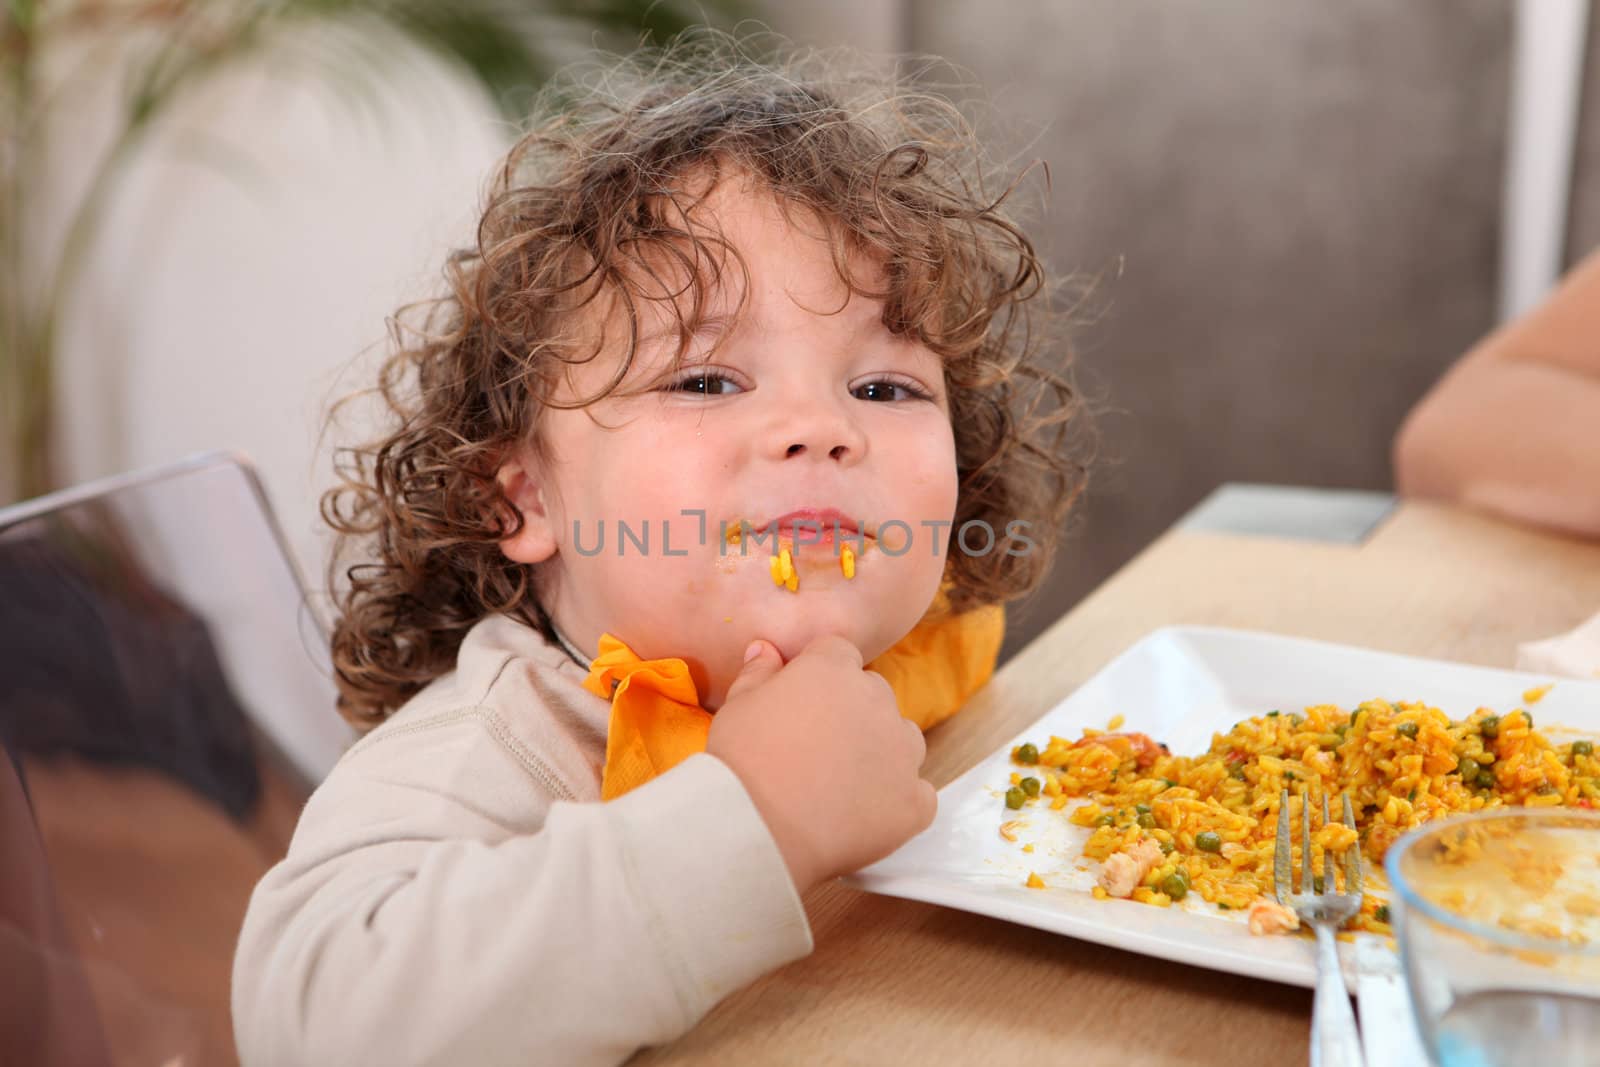 Little boy eating rice at kitchen table by phovoir